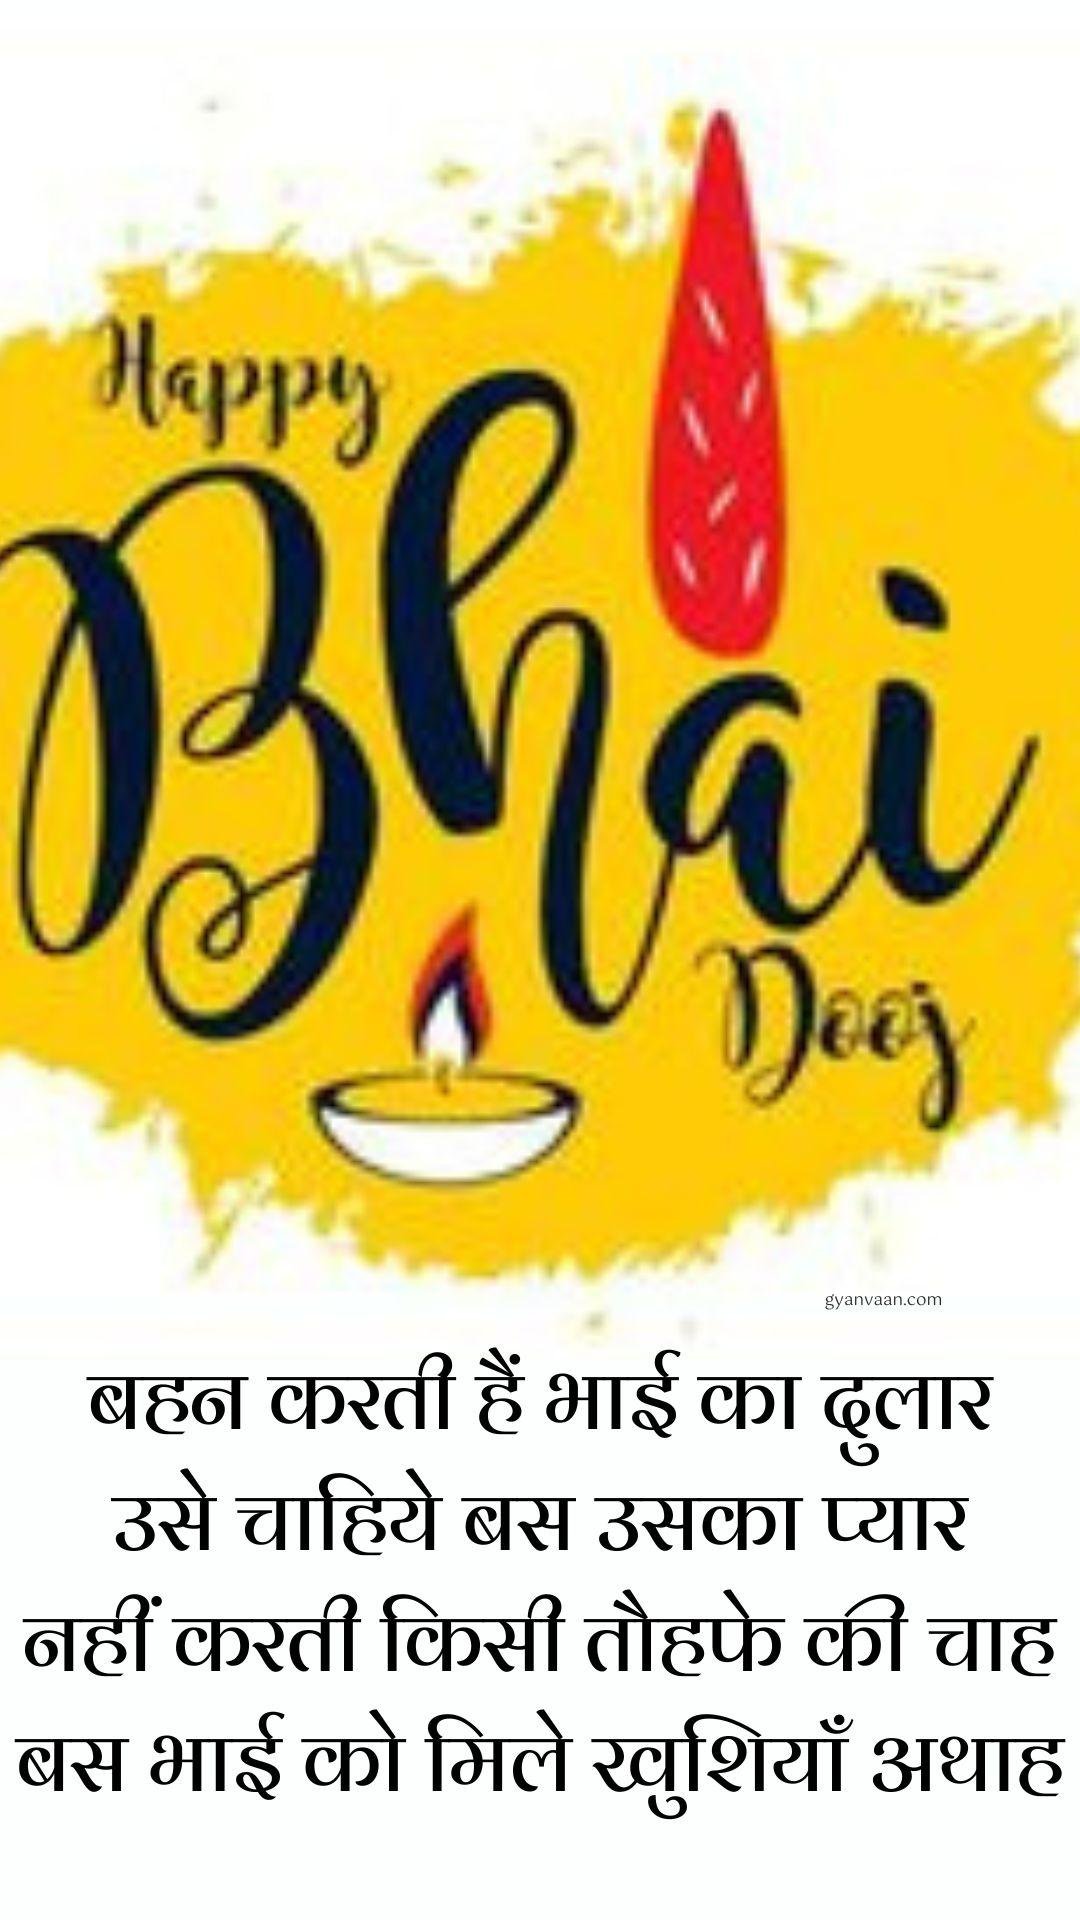 Happy Bhai Dooj Wishes In Hindi With Quotes Status Shubhkamnaye And Messages For Mobile 5 - Bhai Dooj Wishes In Hindi